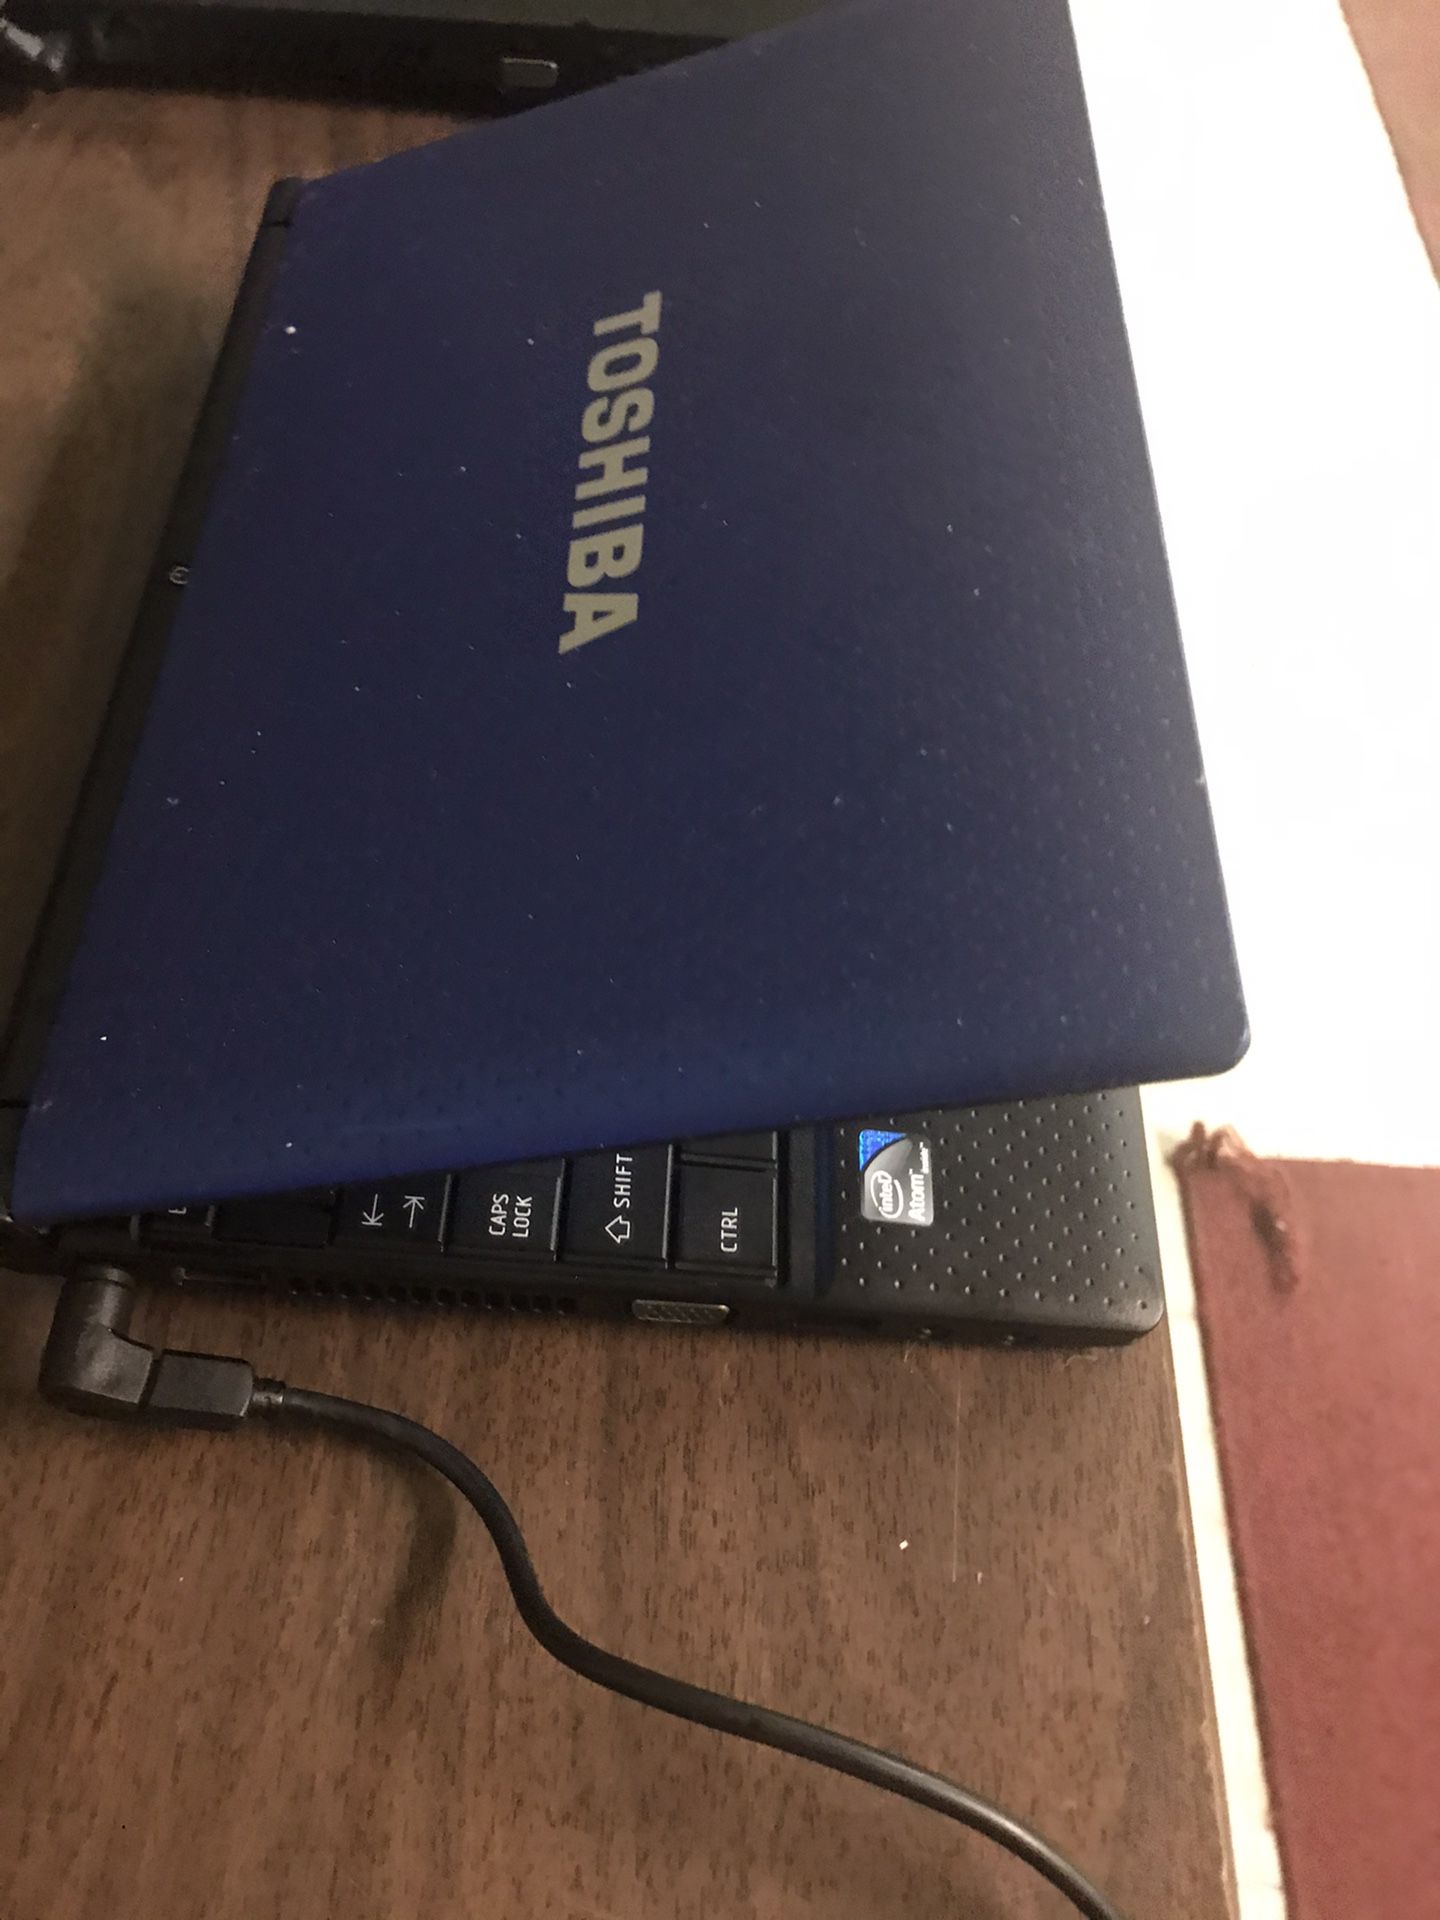 Toshiba 10” laptop no battery But Works Great